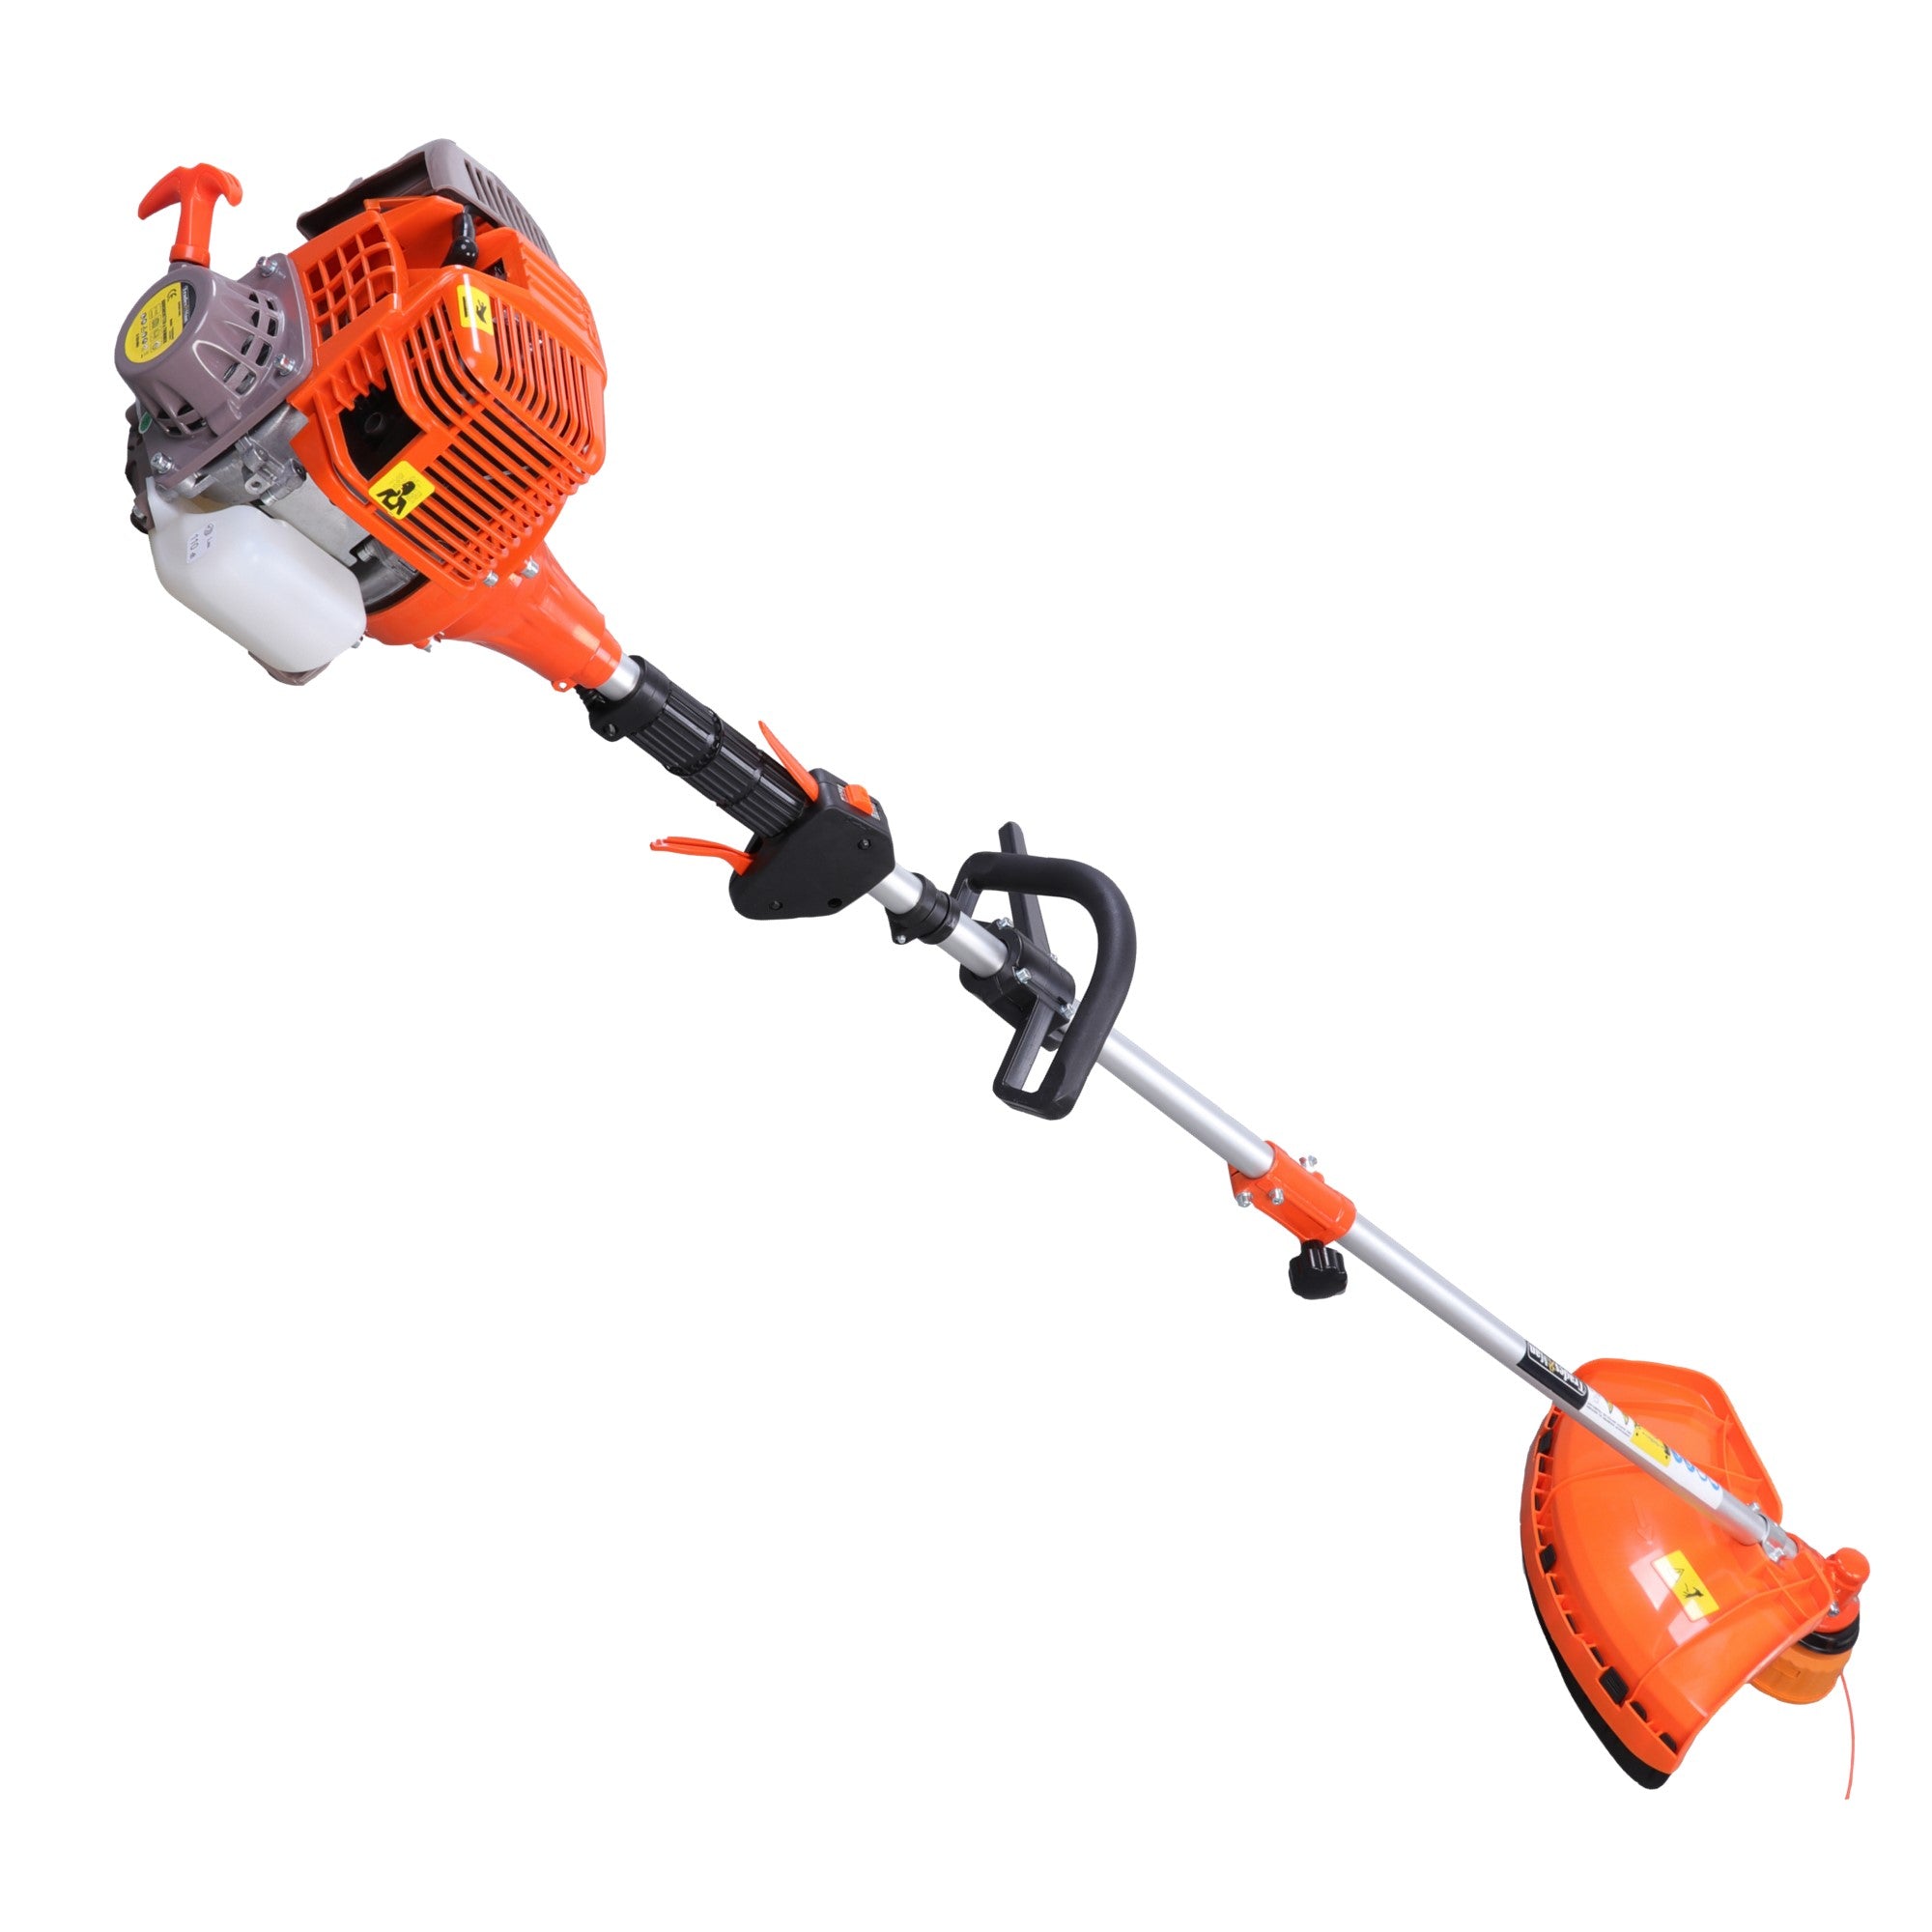 Top grade quality Features a 31cc 4-stroke engine which powers the 17-inch (cutting width) trimmer head